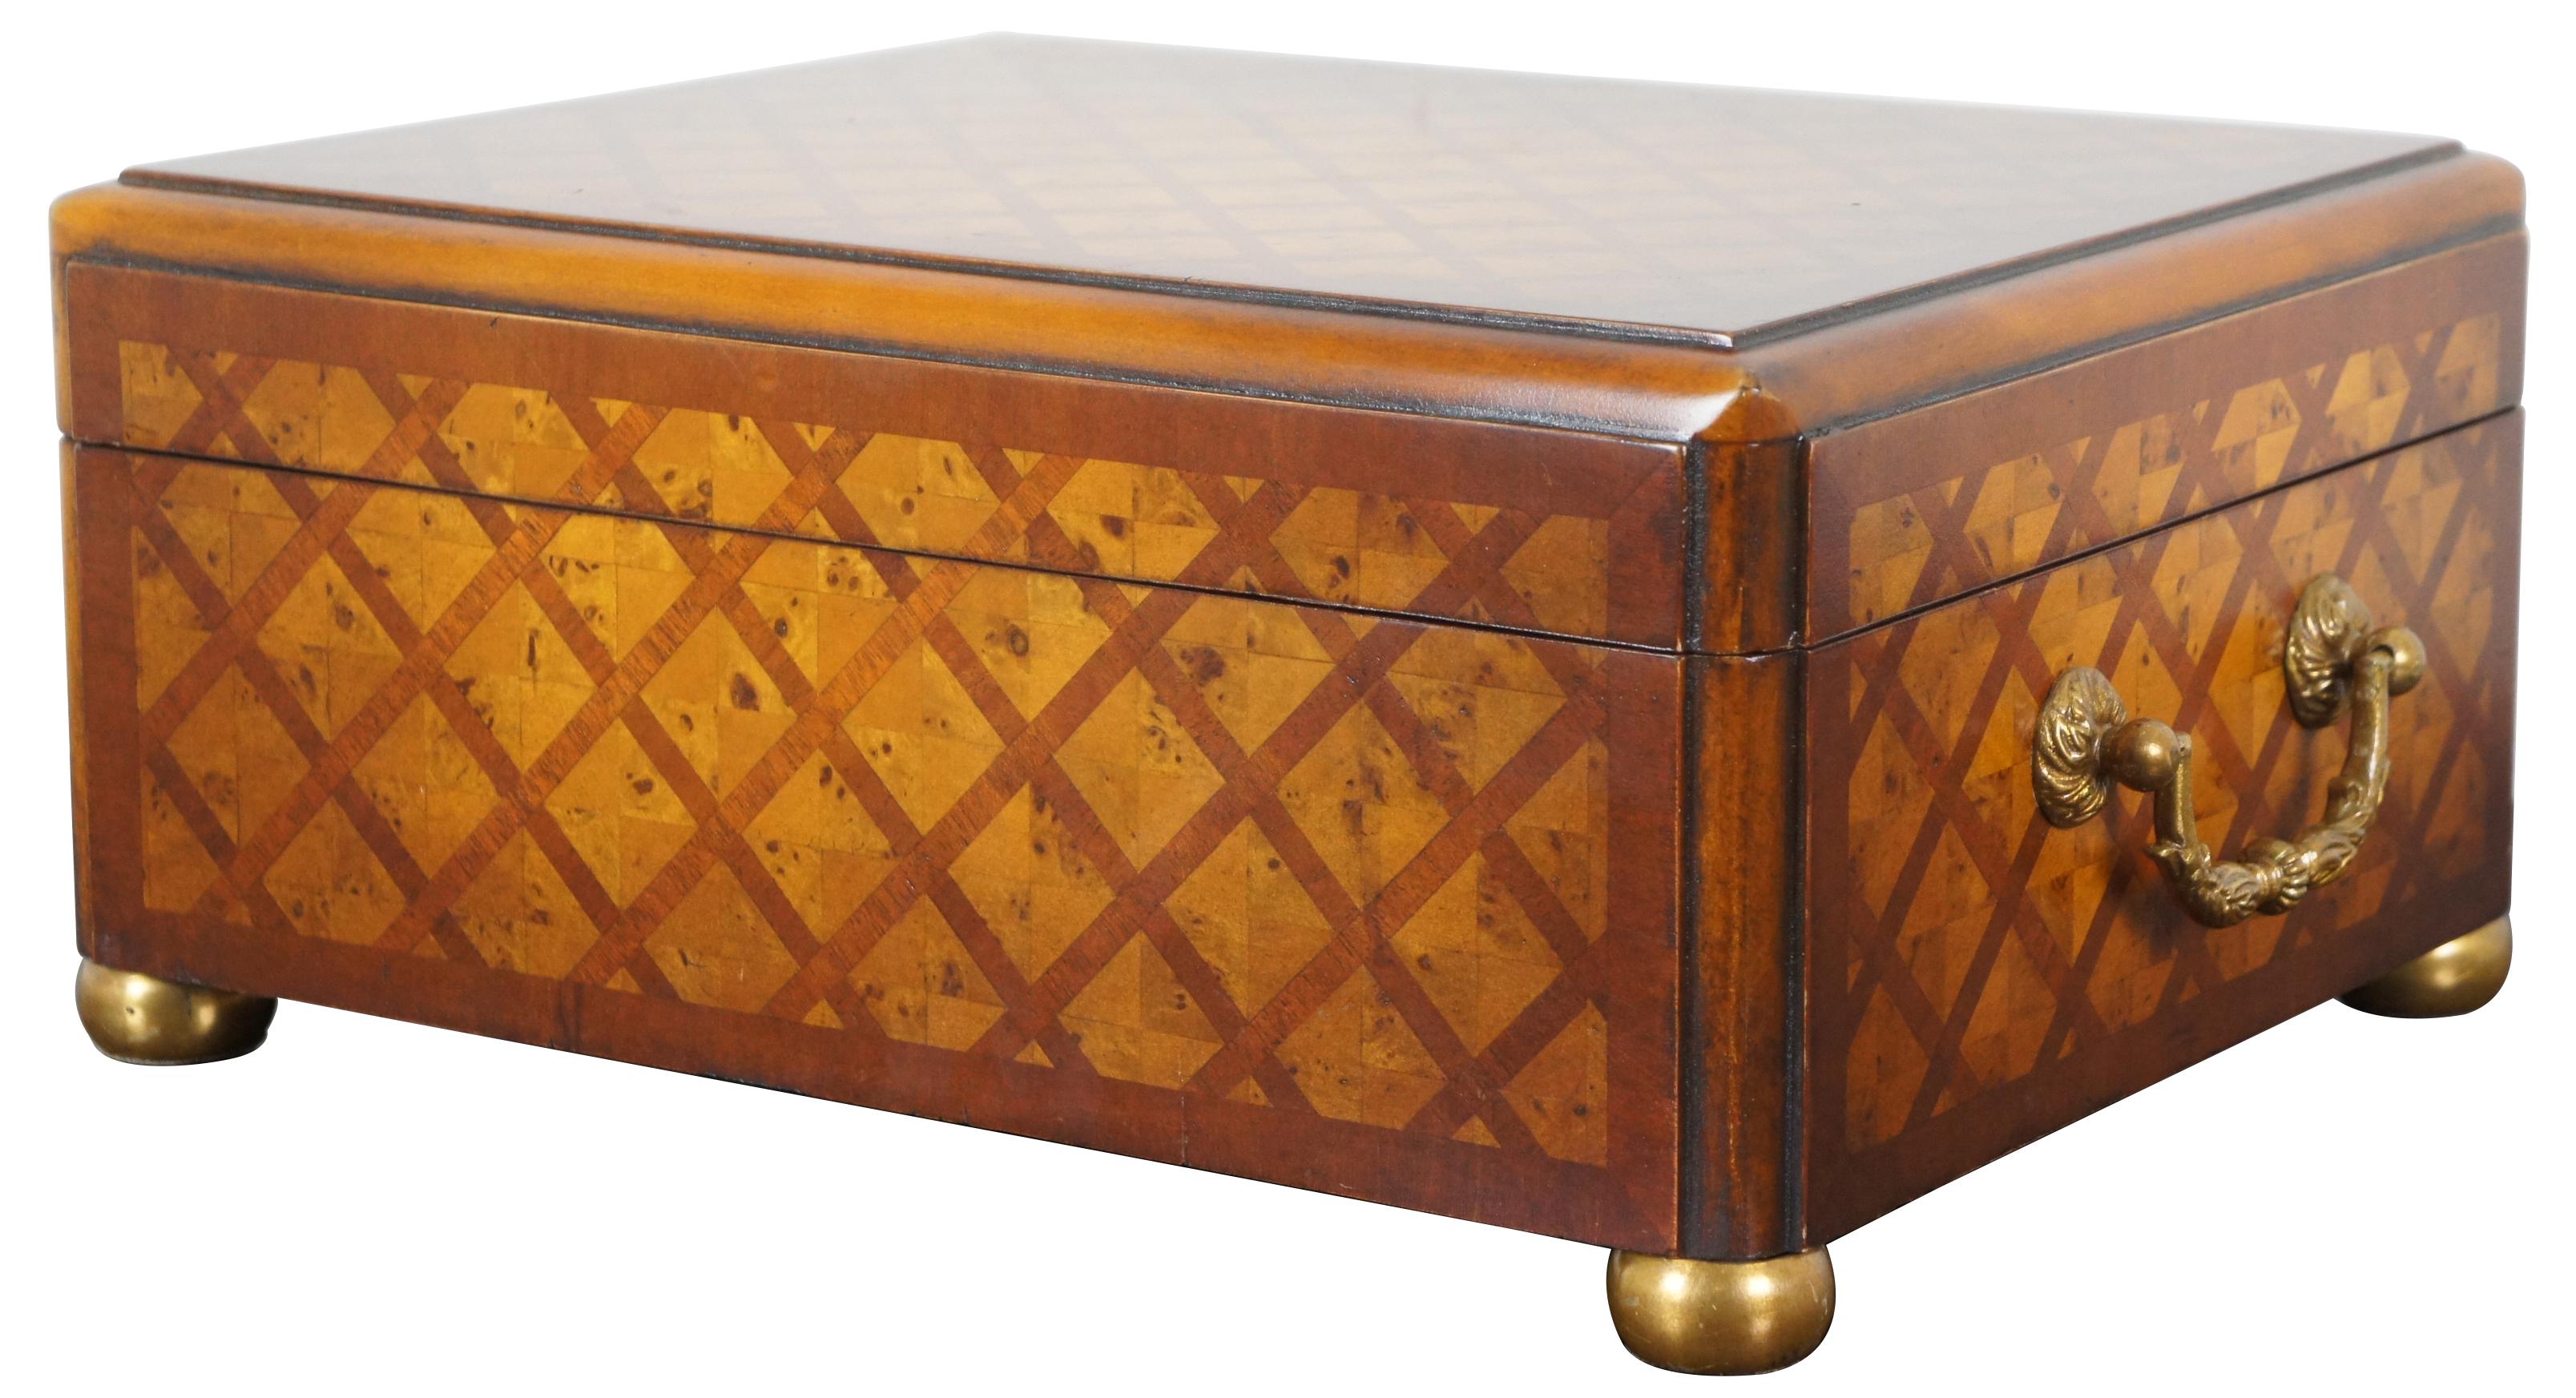 Elegant lidded trinket box casket by Theodore Alexander handcrafted with a parquetry or marquetry design, footed bun feet and brass handles. Made of walnut with olive burl matchbook inlay.
  